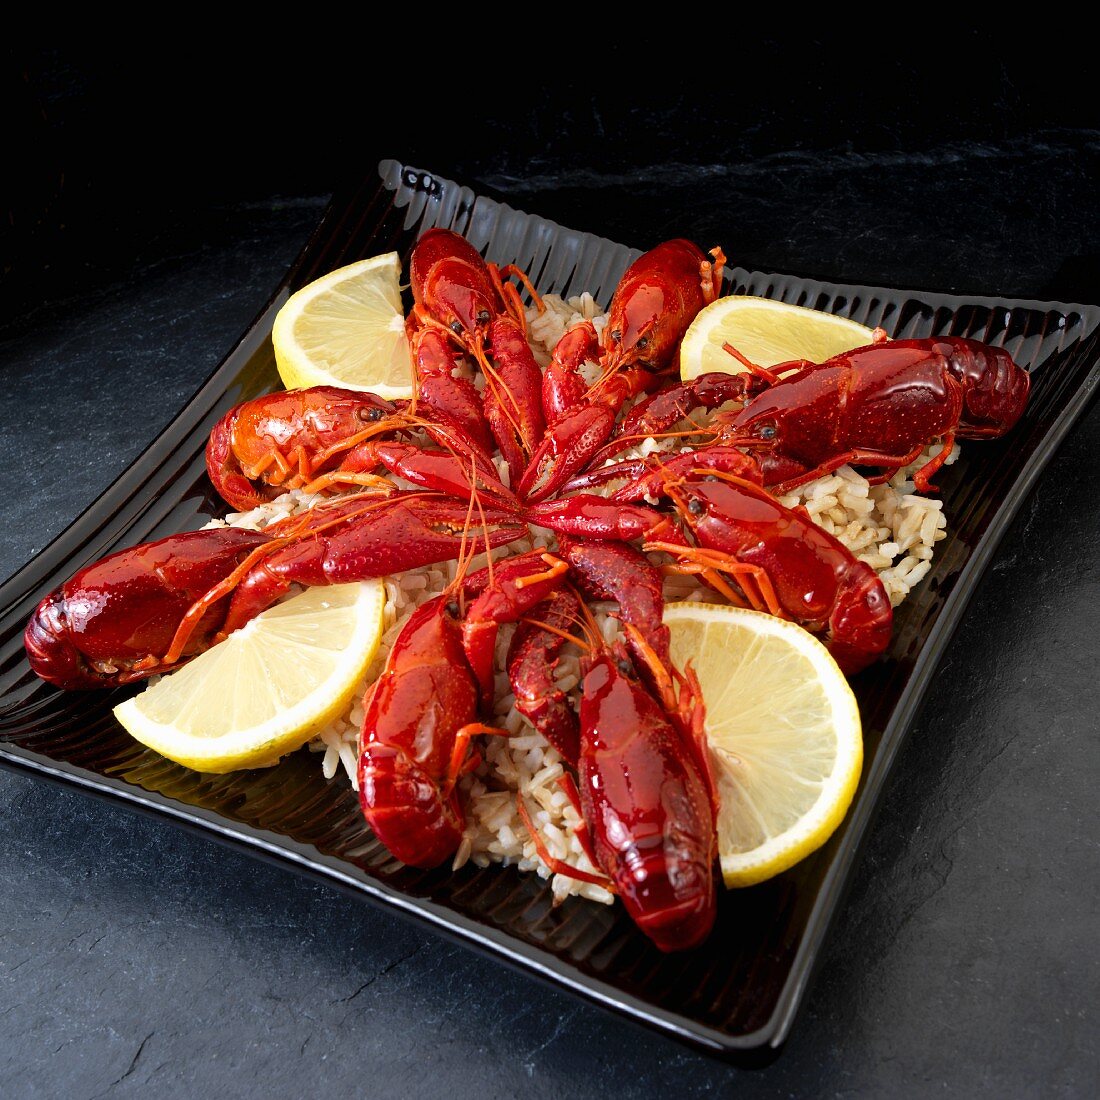 Cooked crayfish with lemons on wild rice